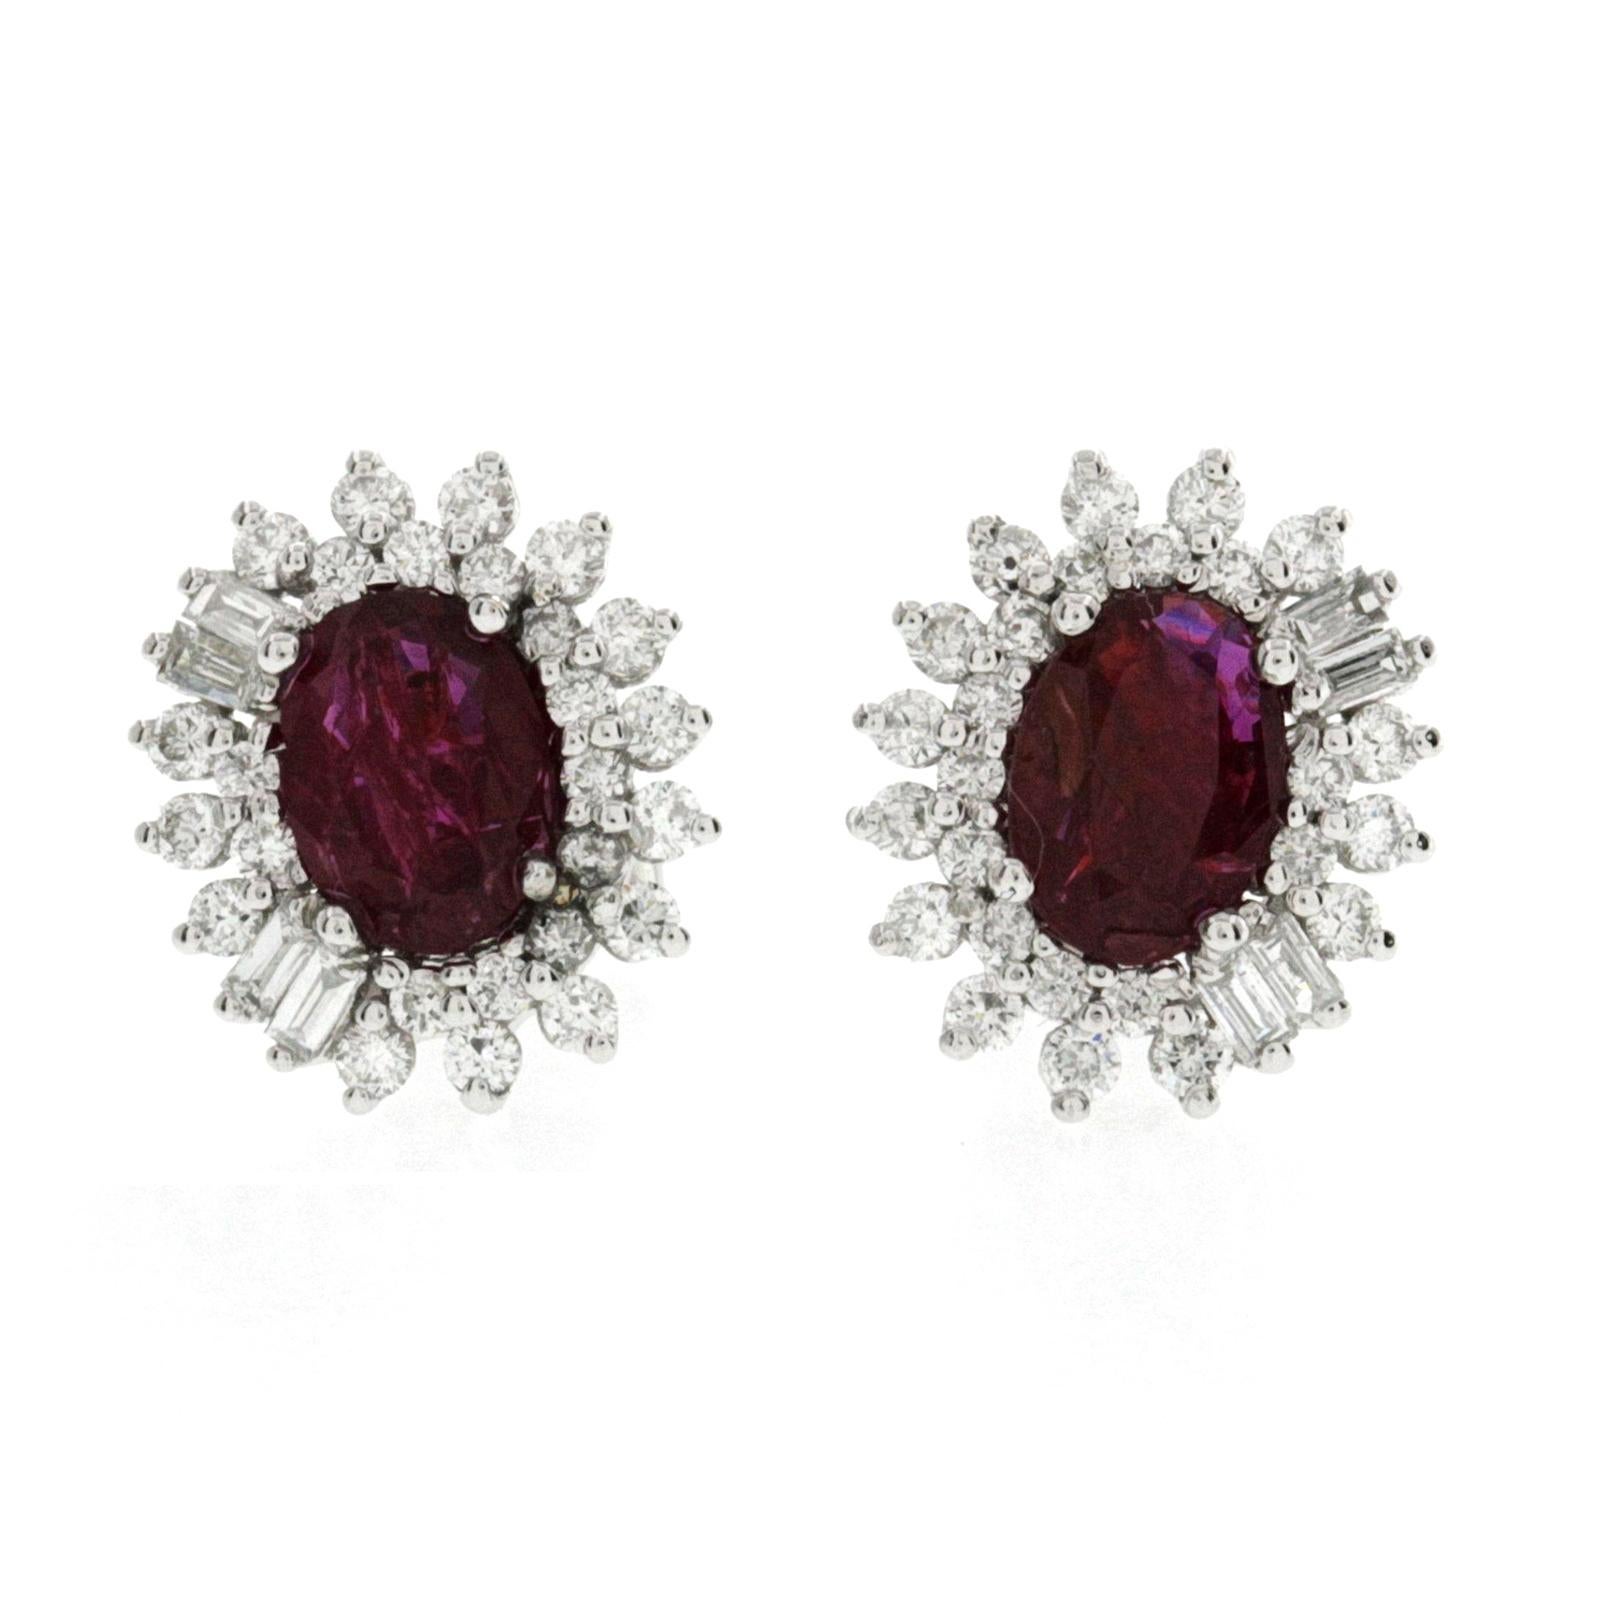 14 Karat White Gold 0.88 Carat Diamonds and 1.69 Carat Ruby Stud Earring In Excellent Condition For Sale In Los Angeles, CA